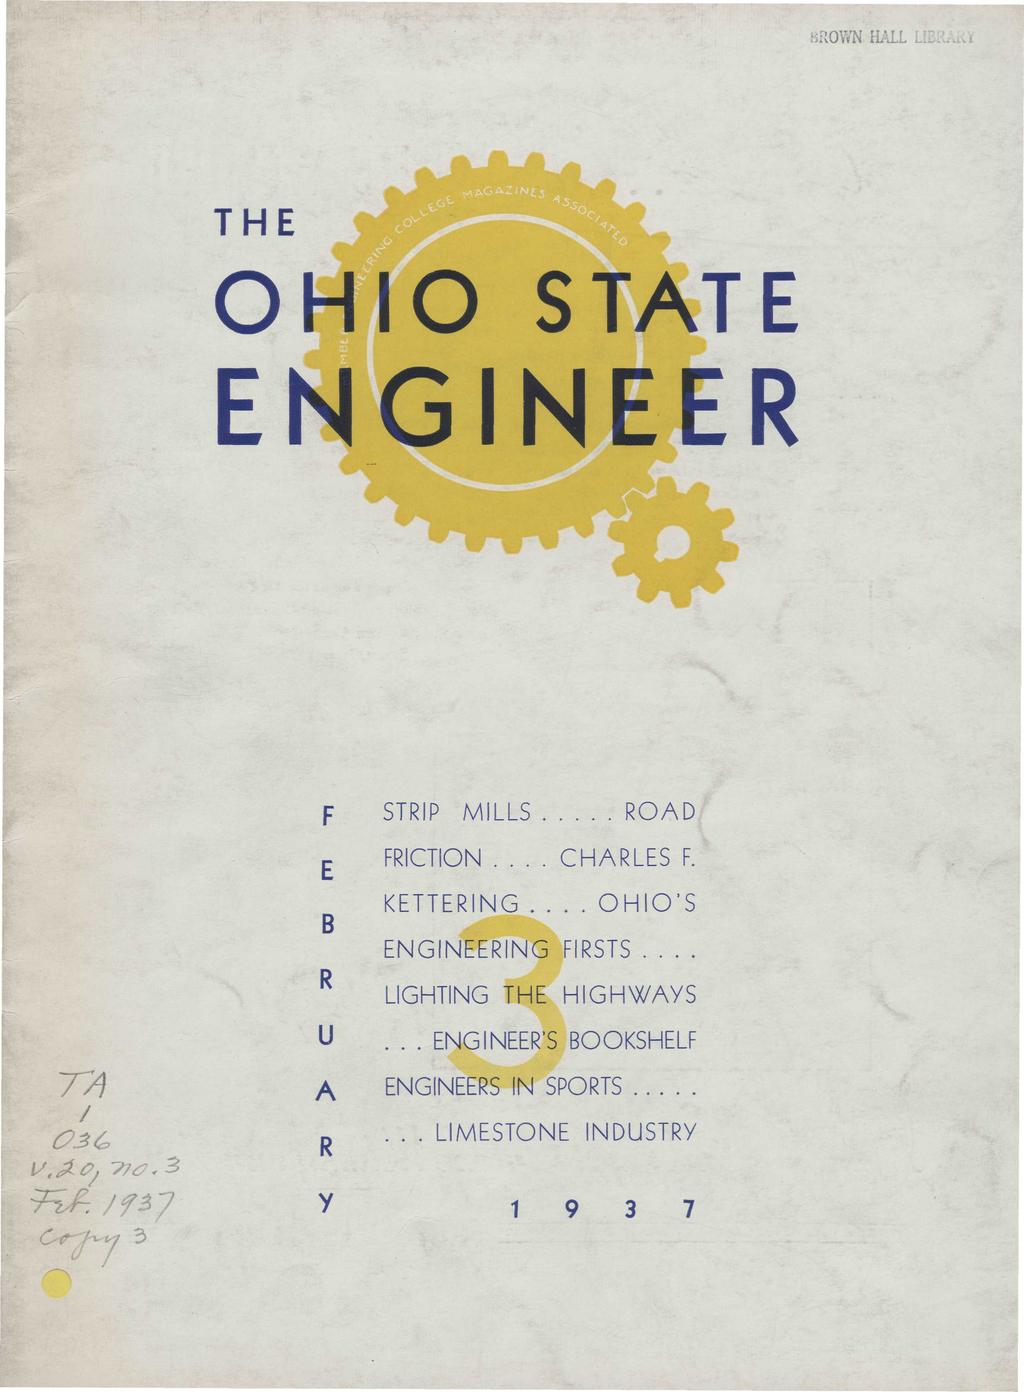 THE OHIO STATE ENGINEER F E B R U A R y STRIP MILLS ROAD FRICTION... CHARLES F. KETTERING.